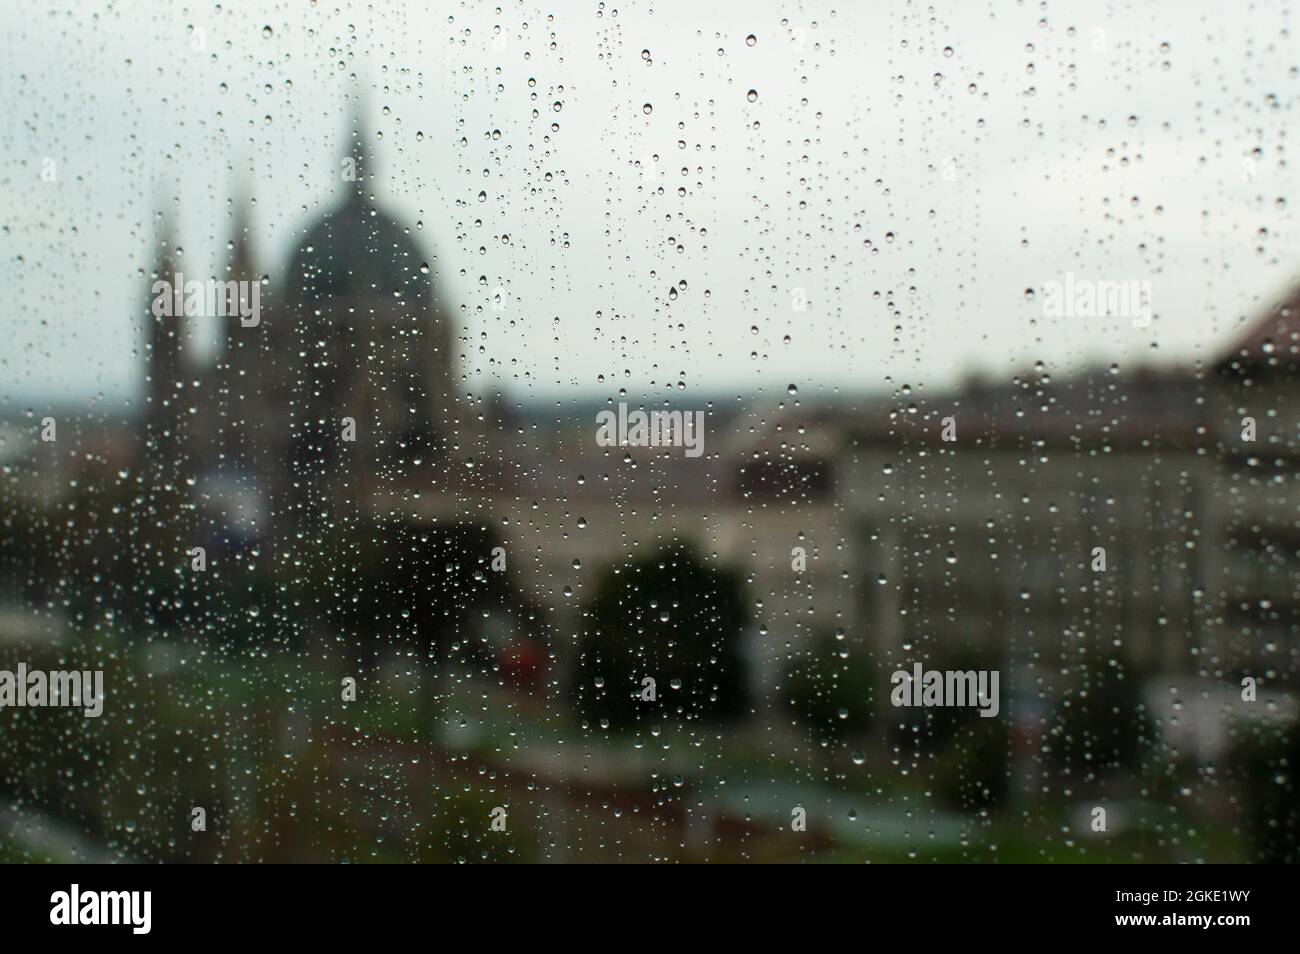 View of Viennese buildings through window on rainy day Stock Photo